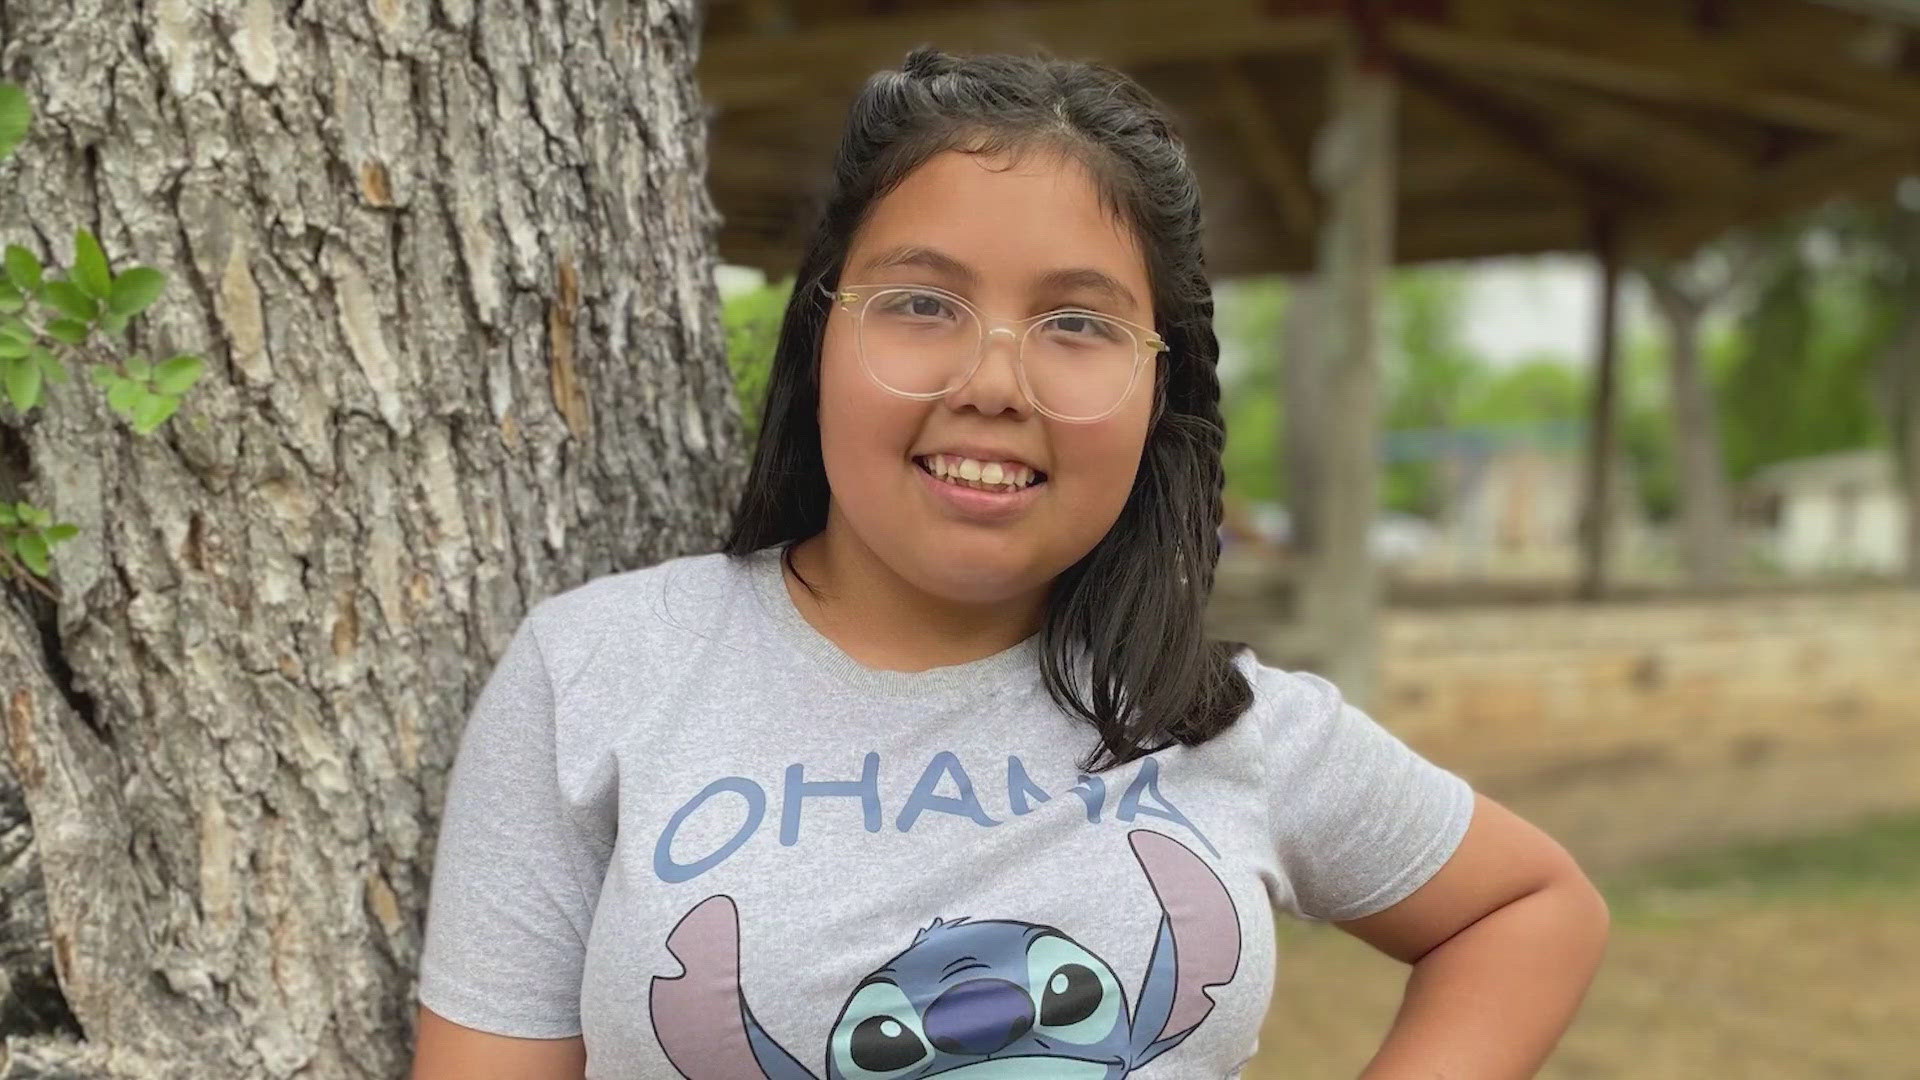 Forever Family | This 12-year-old loves to cook but would love a forever family more